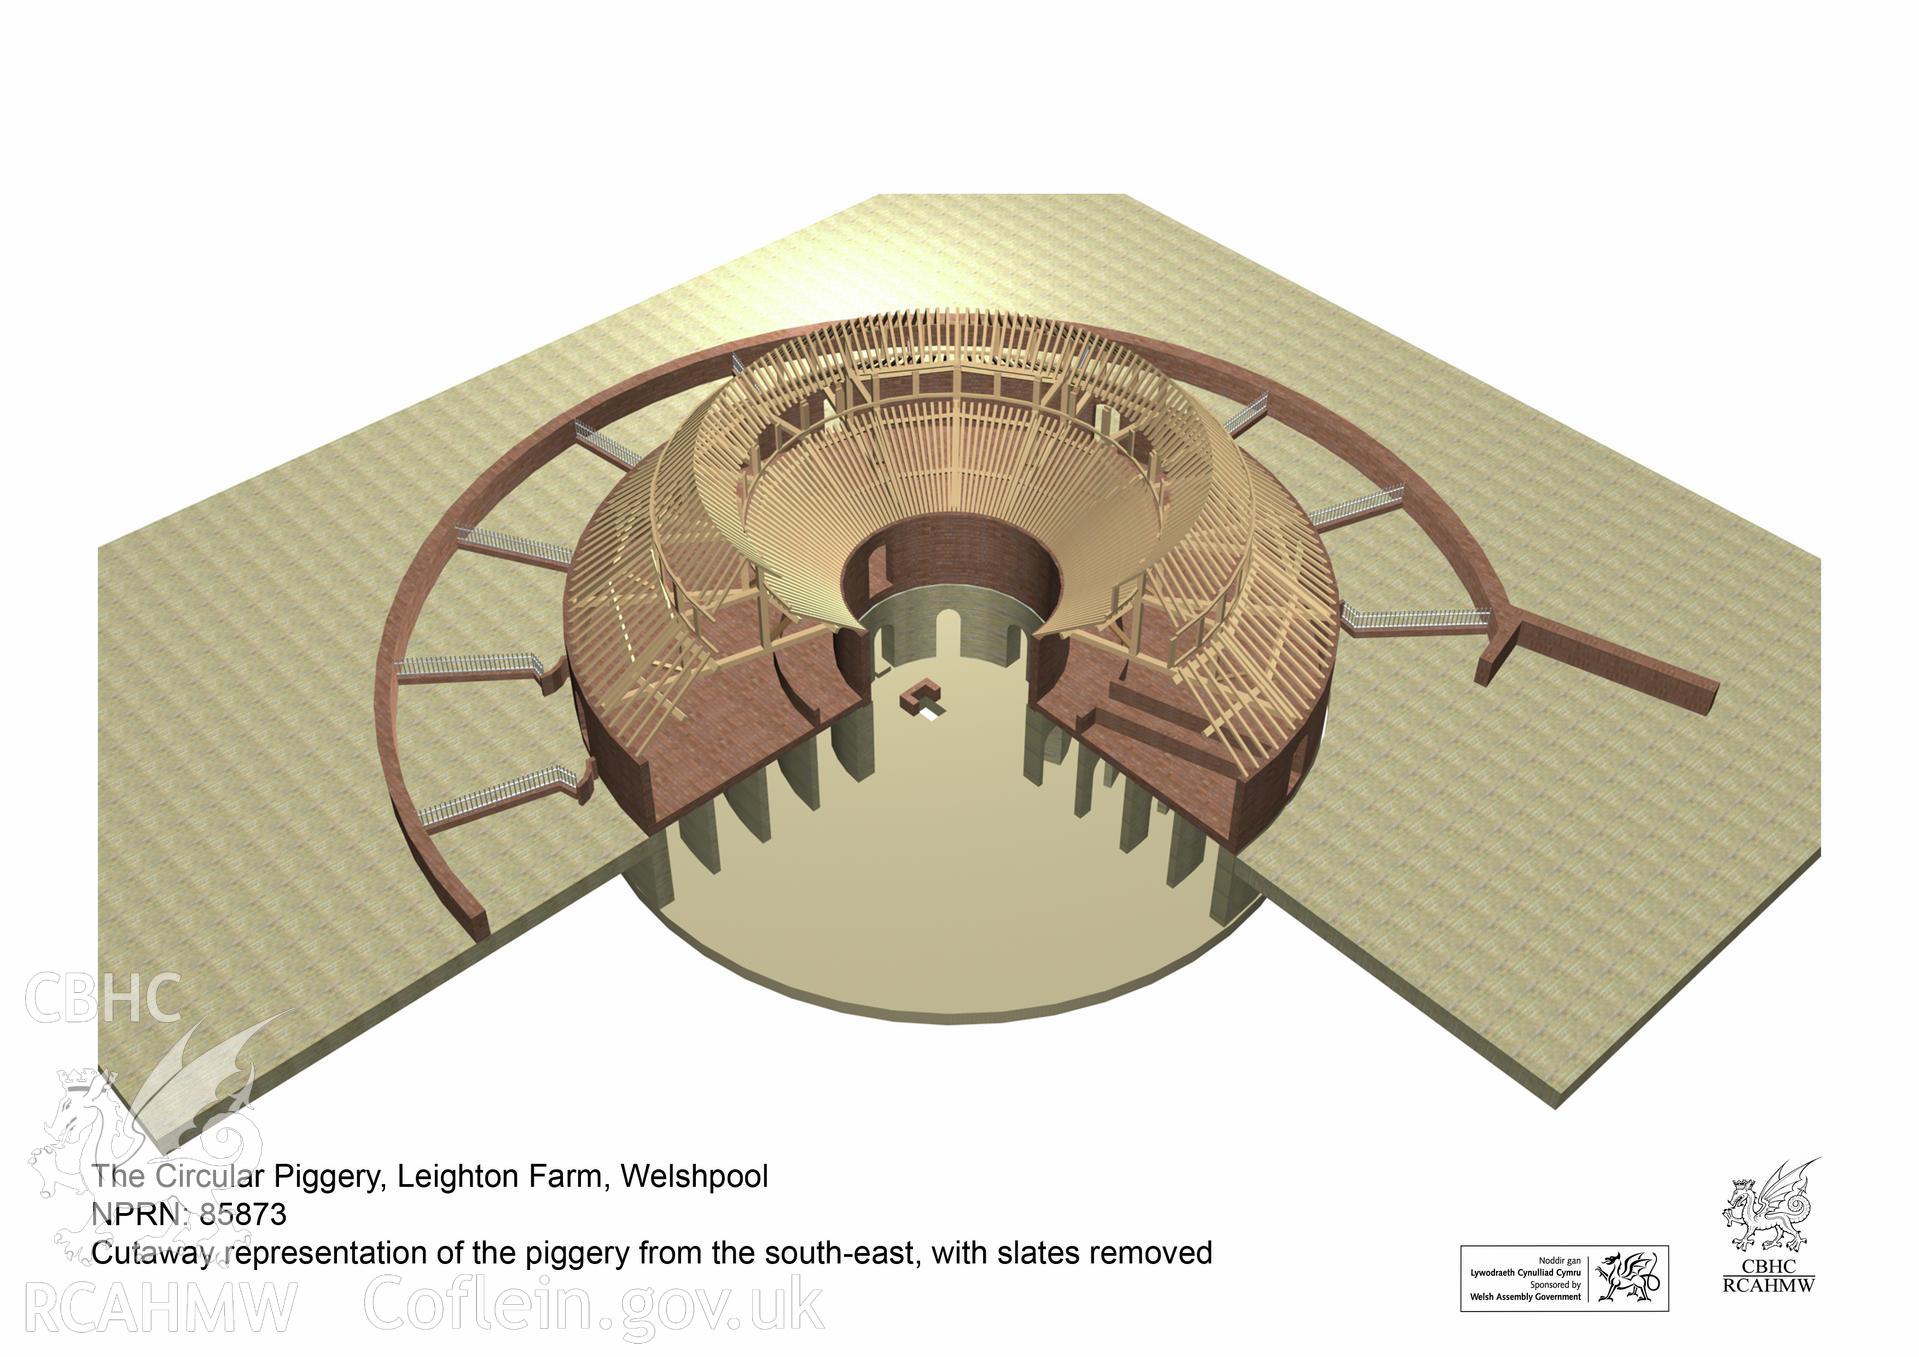 Still taken from a 3D Studio Max model showing the circular piggery in a cutaway view from the south-east, with the slates removed, from an RCAHMW digital survey of the Circular Piggery, Leighton Farm, Welshpool. Carried out by Susan Fielding, 11/08/2008.